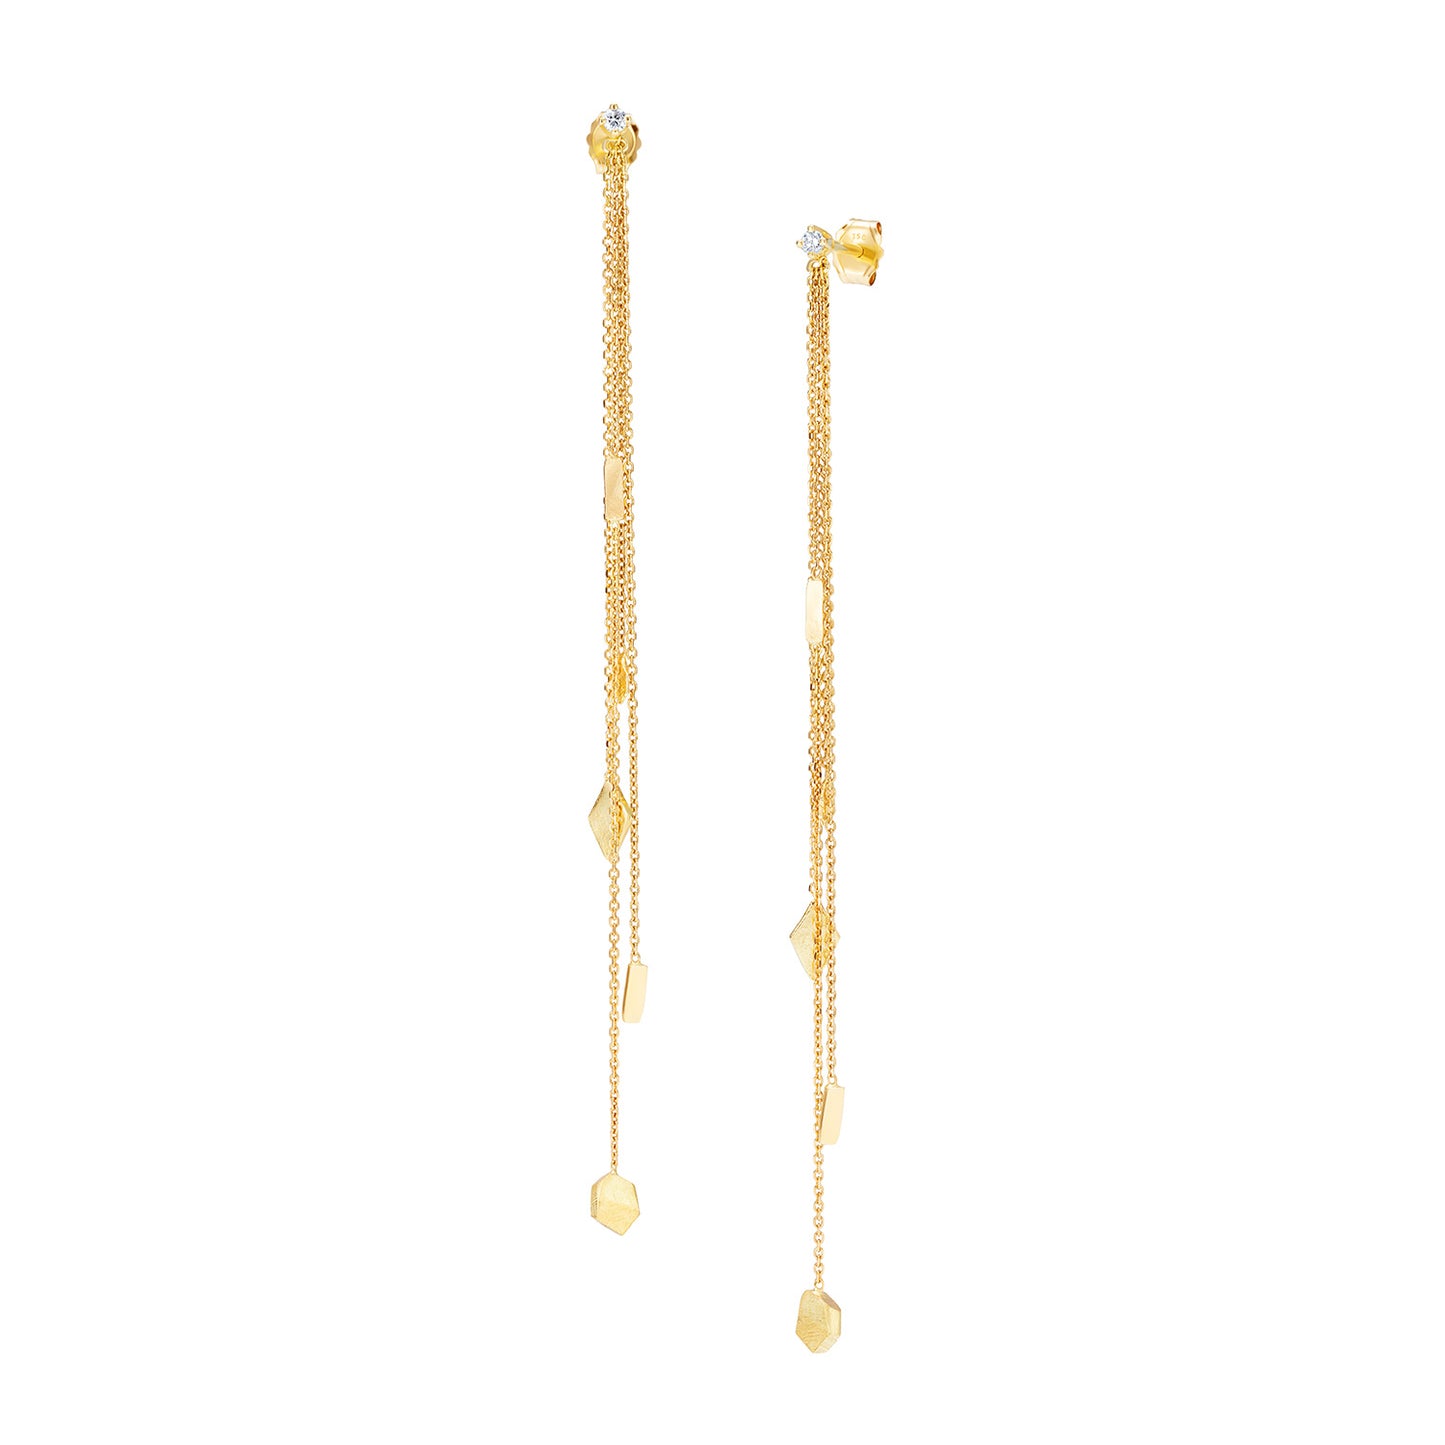 18ct Gold diamond stud with three hanging chains and mixed gold shapes on ends